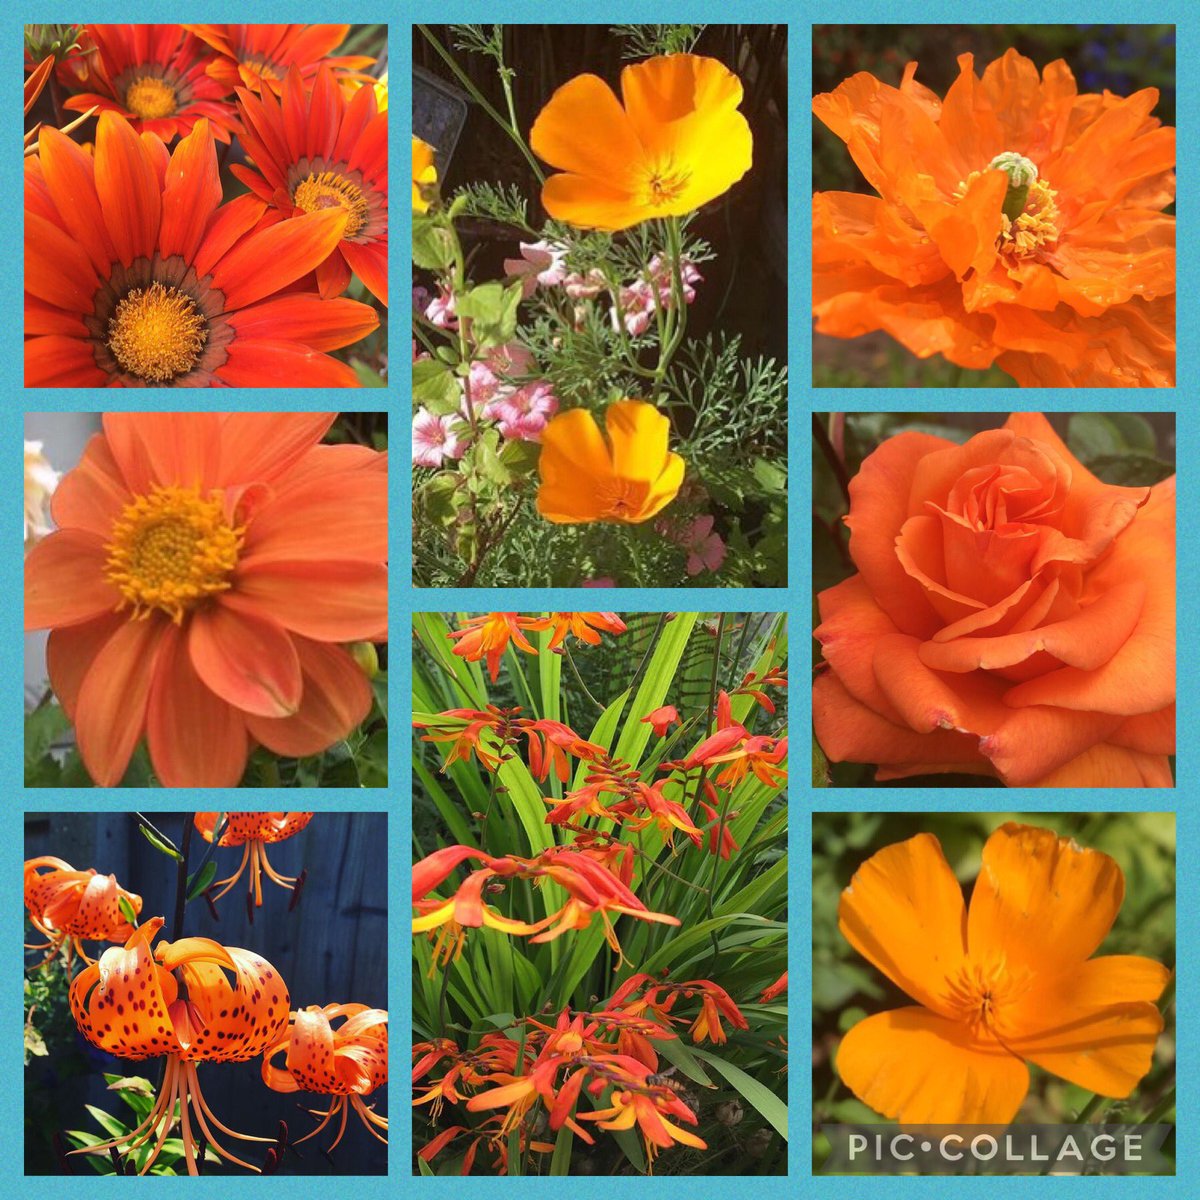 Some fiery orange #flowers to heat this Saturday up a bit.  Have a good day whatever you’re up to 🙂🧡 🔥 #gardening #flowercollage #orangeflowers